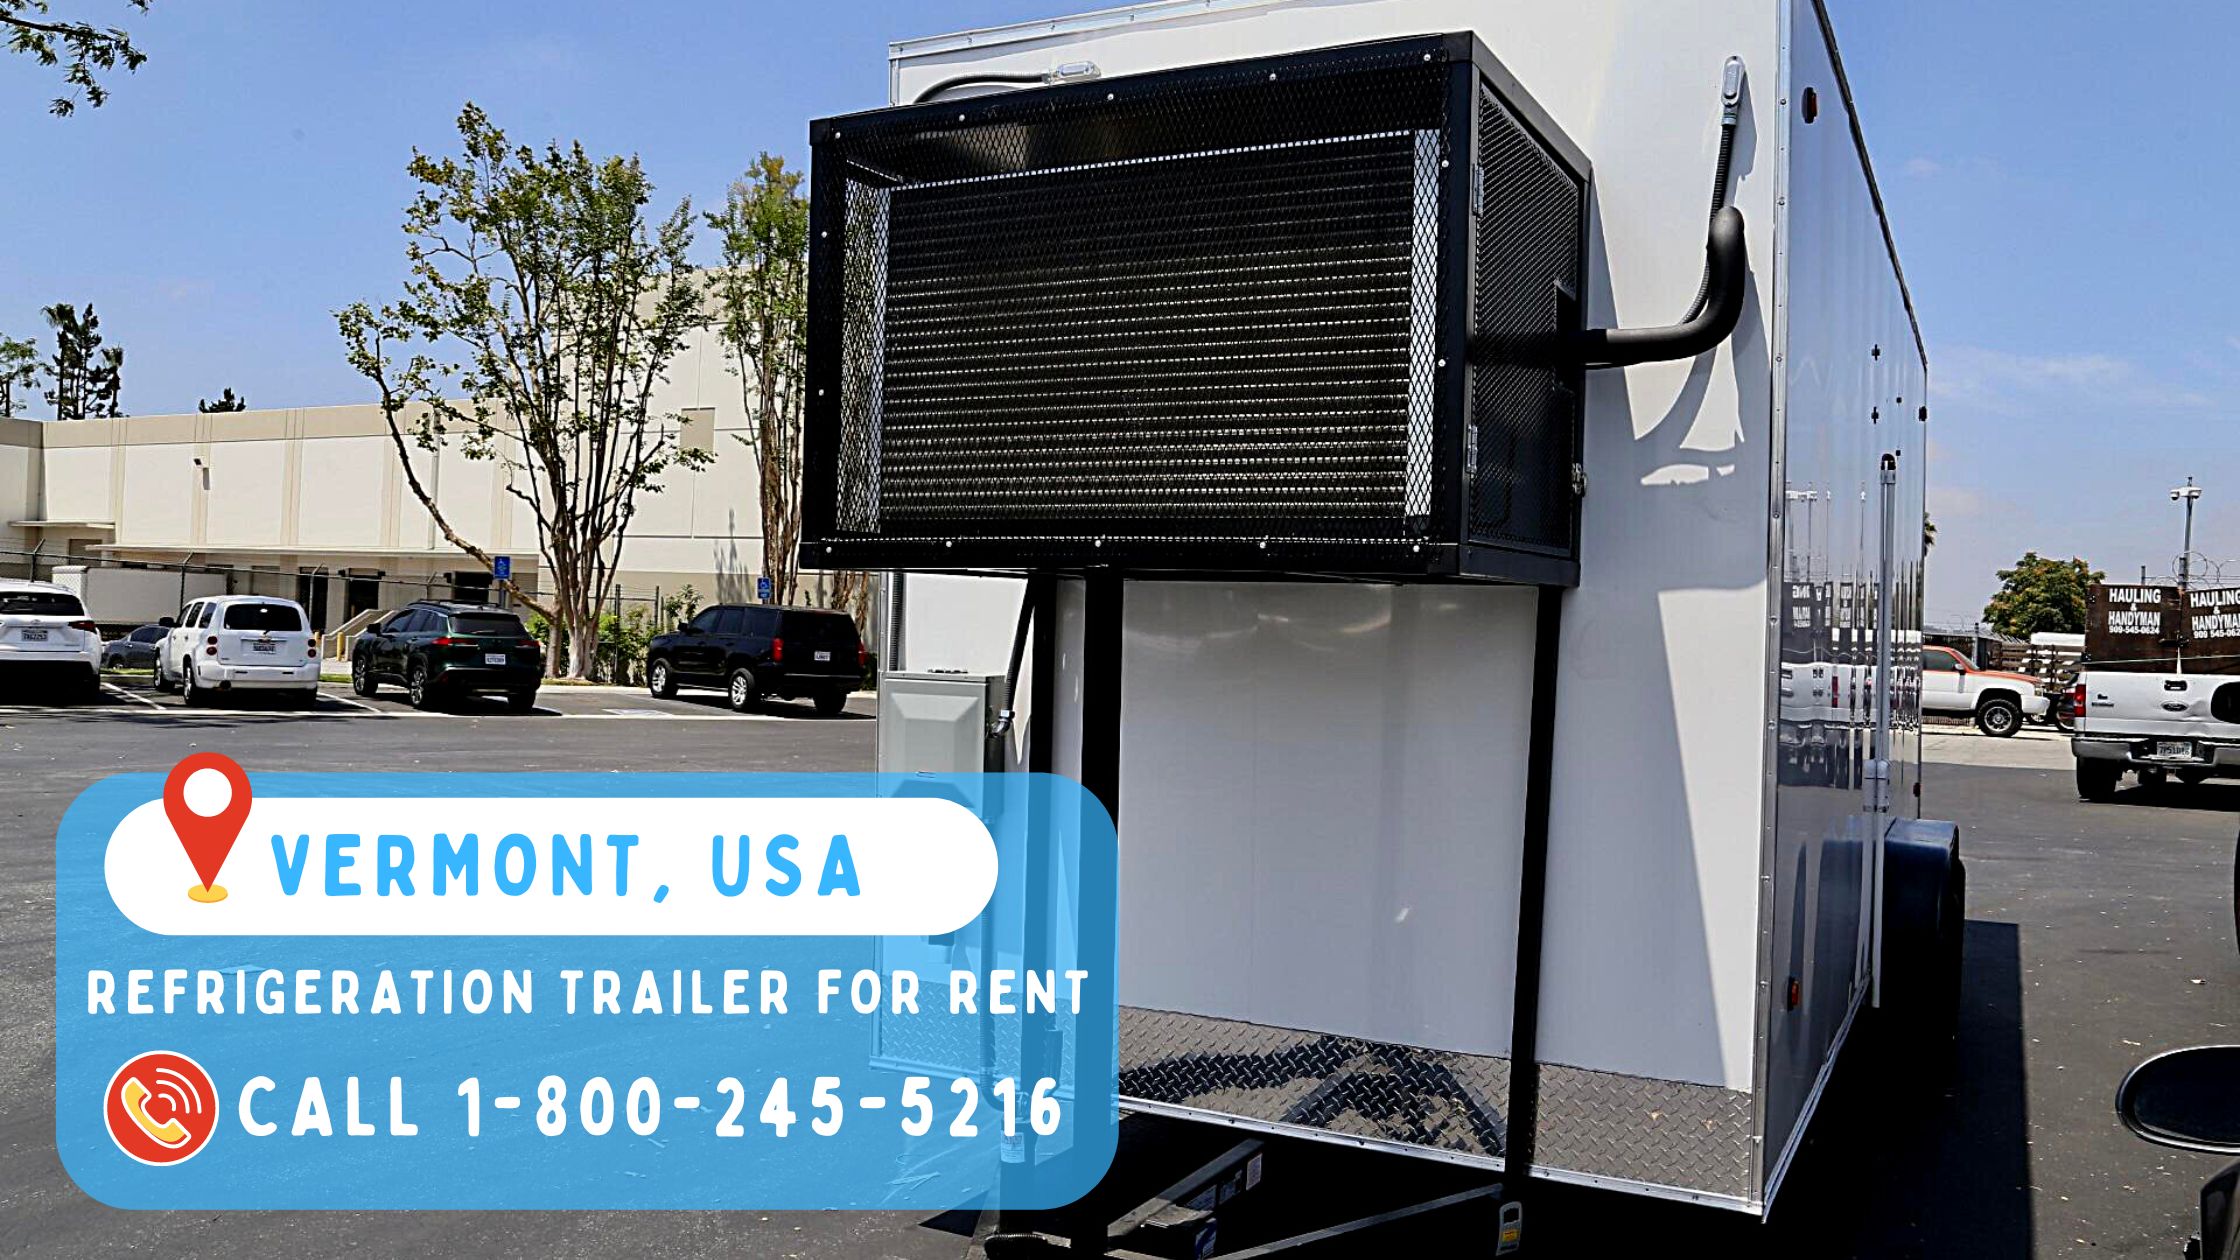 Refrigeration Trailer for Rent in Vermont